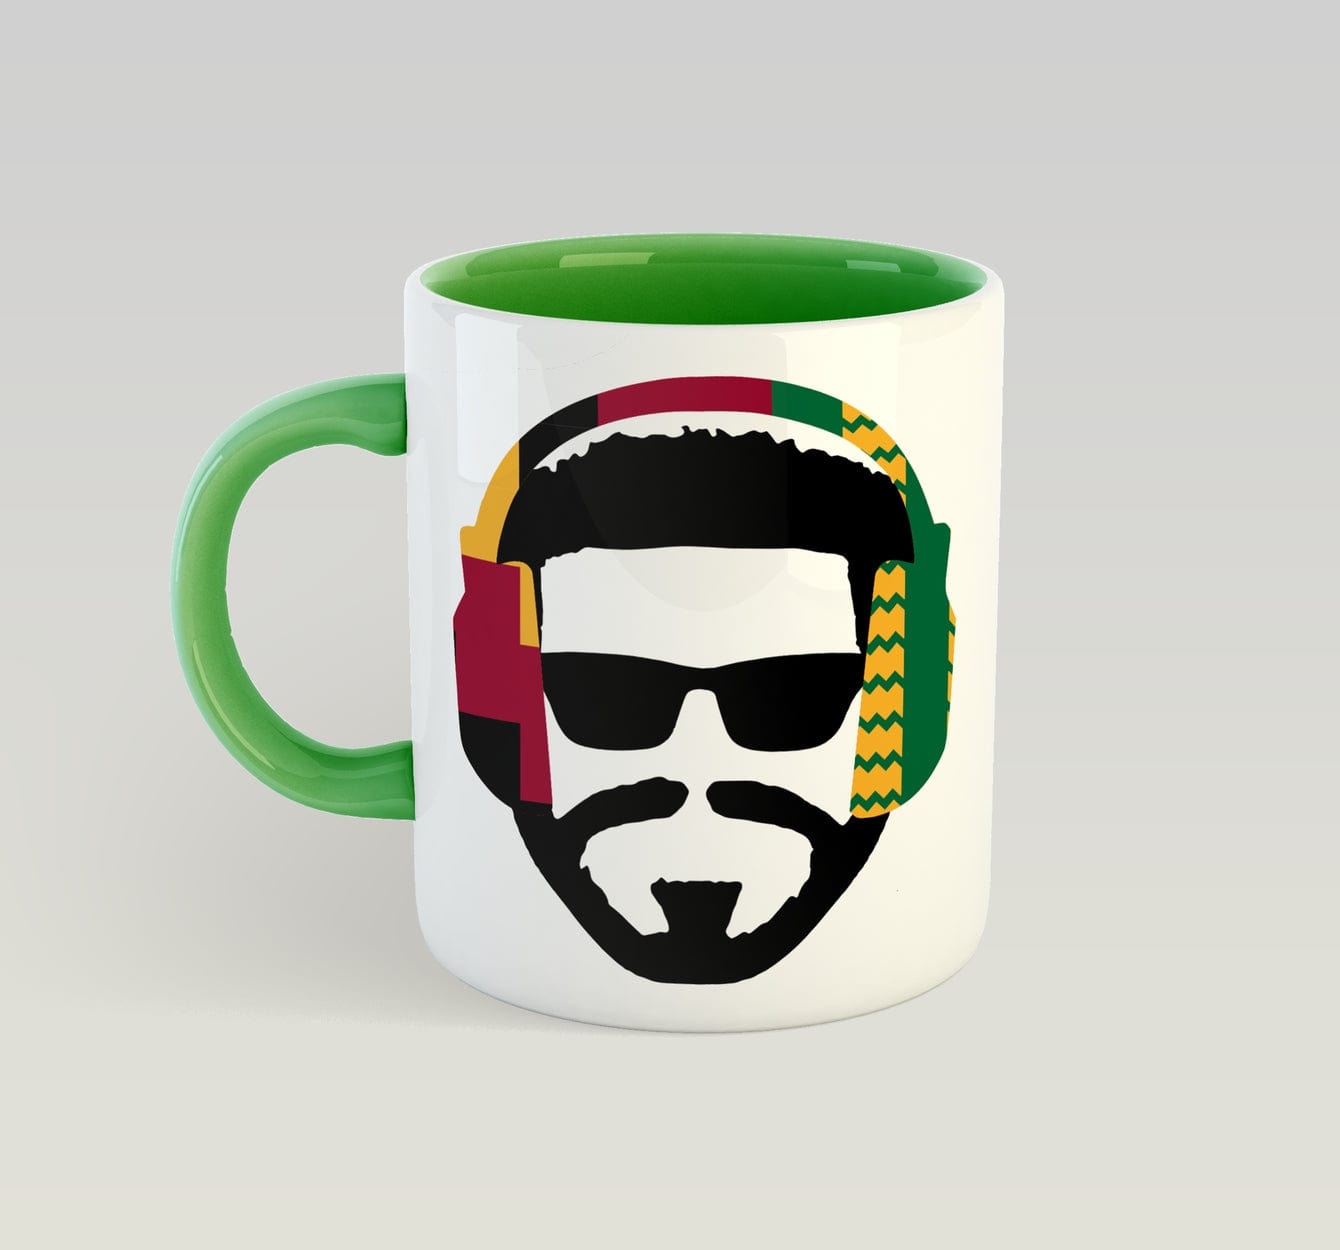 Music Man Mug by Afrotouch - Green